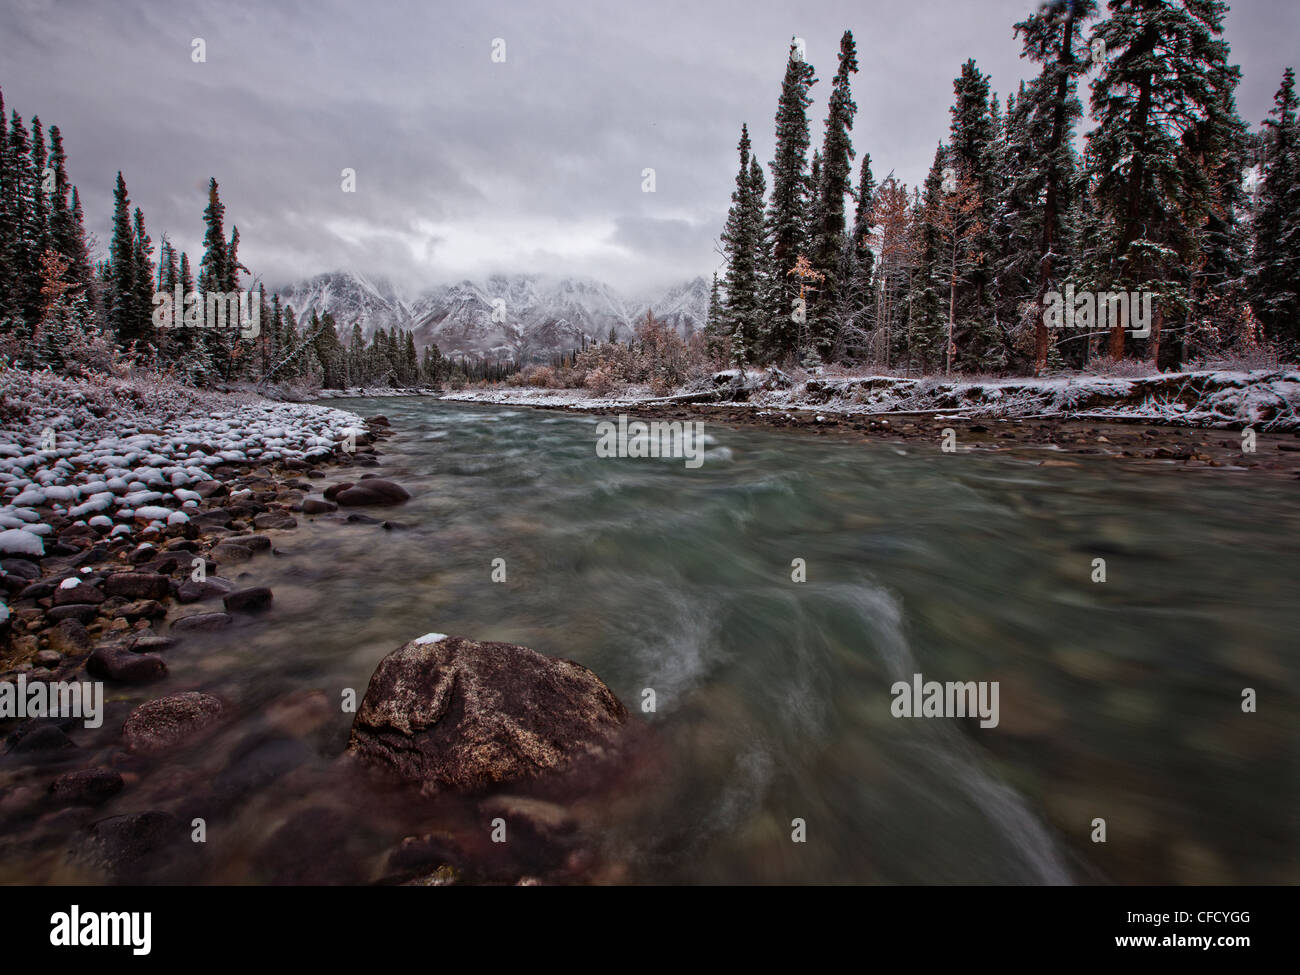 The Wheaton River continues to run with the snow coating the rocks, trees and mountains, Yukon, Canada. Stock Photo